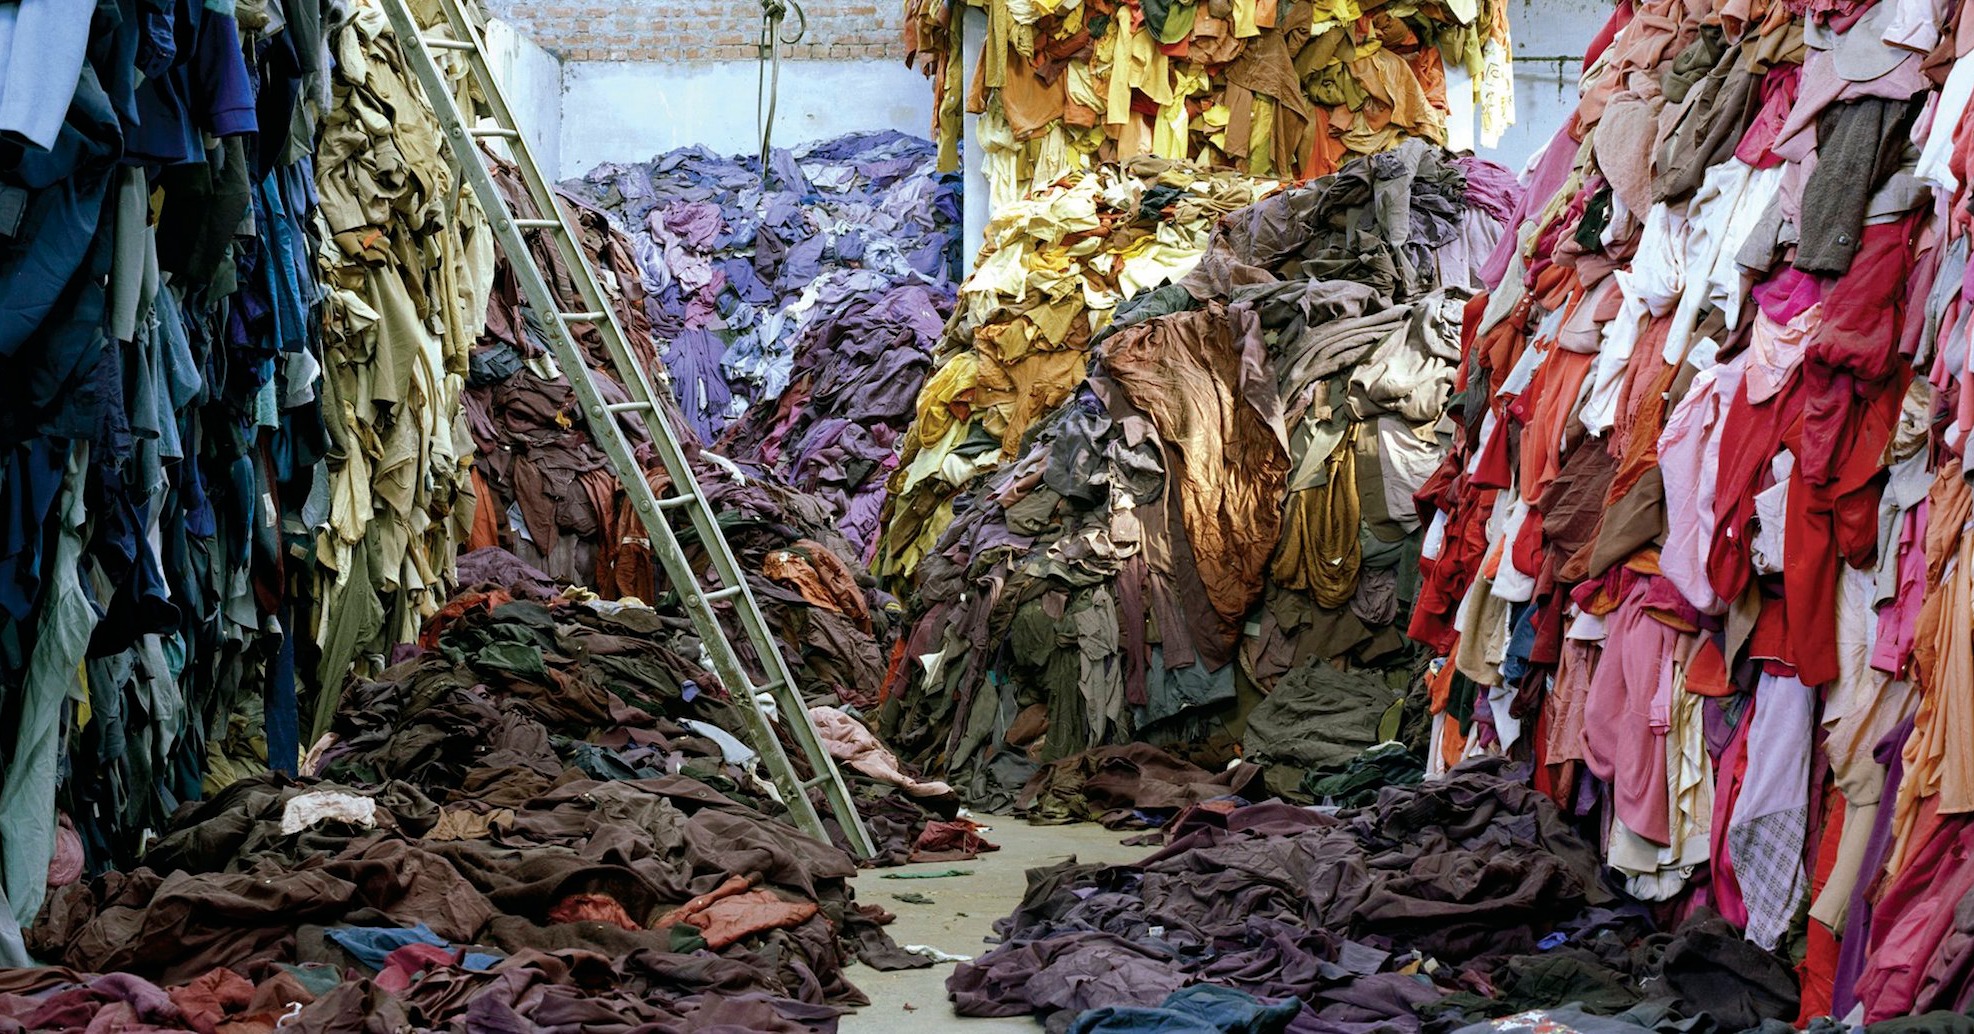 Huge piles of clothes with a ladder to climb to the top